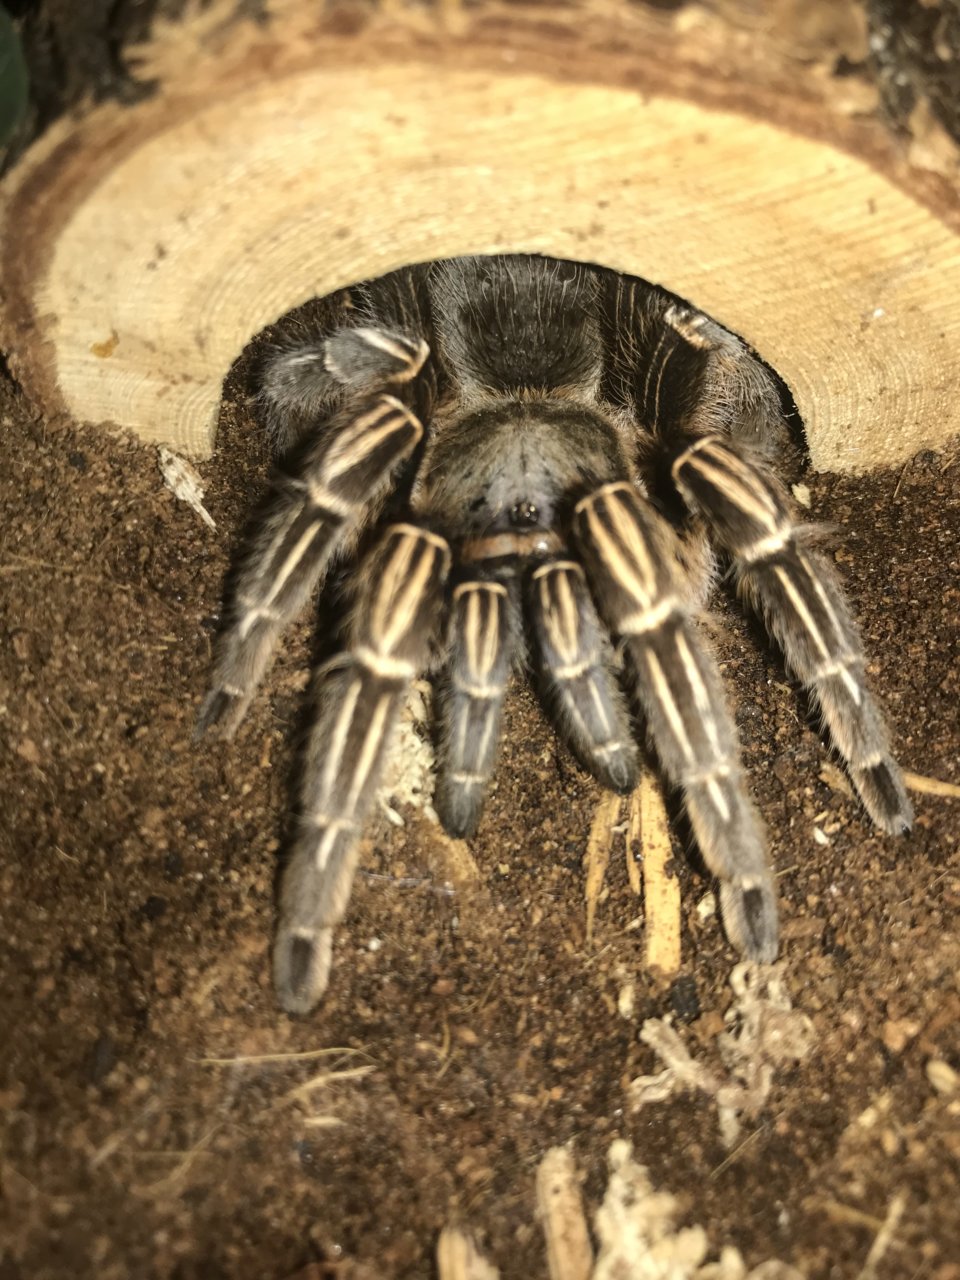 A. seemanni looking extra pretty today